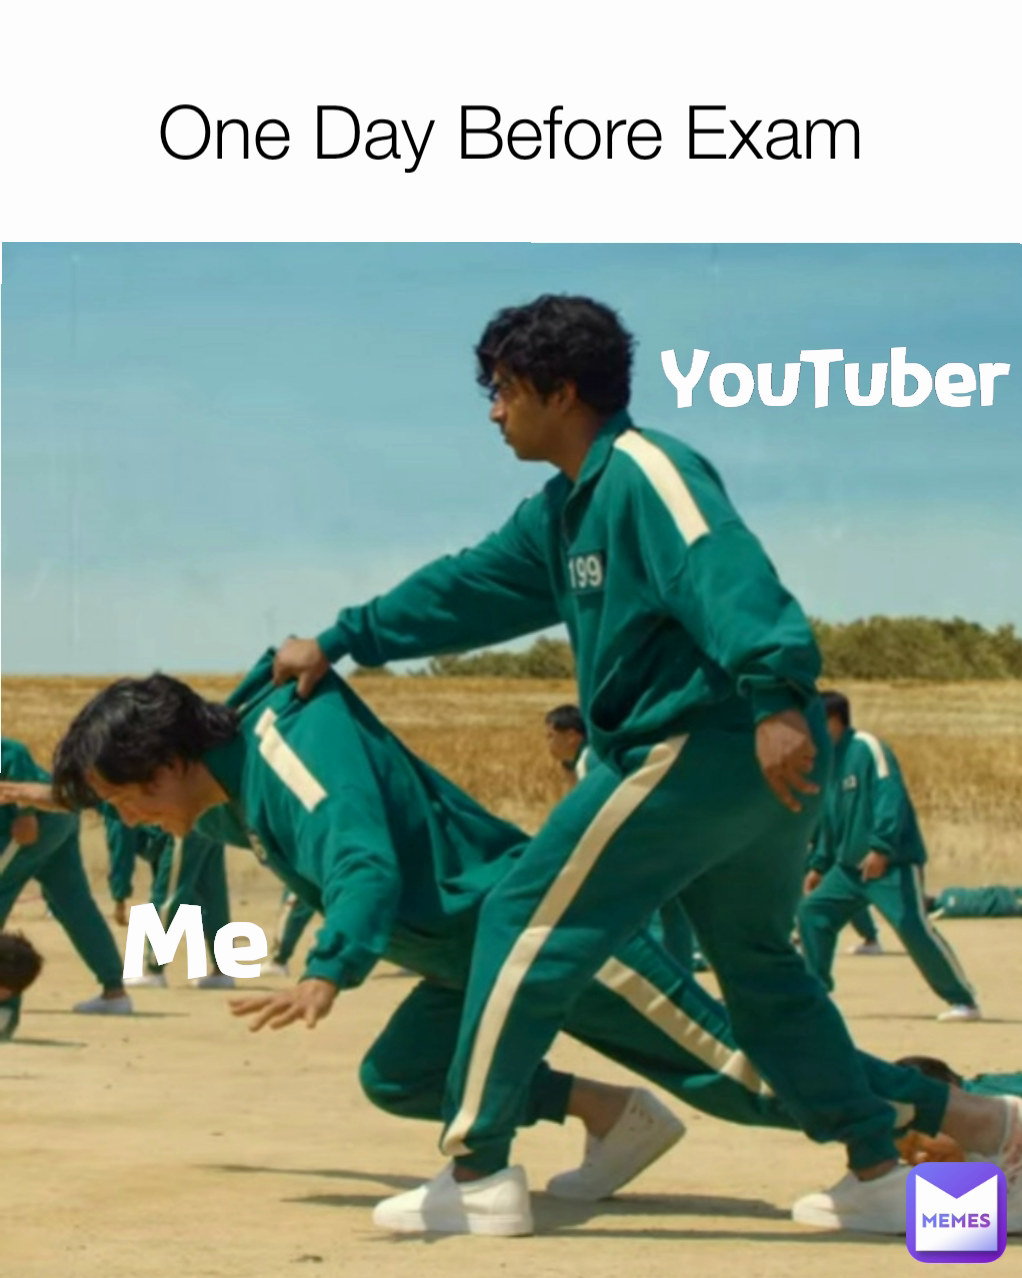 YouTuber Me One Day Before Exam